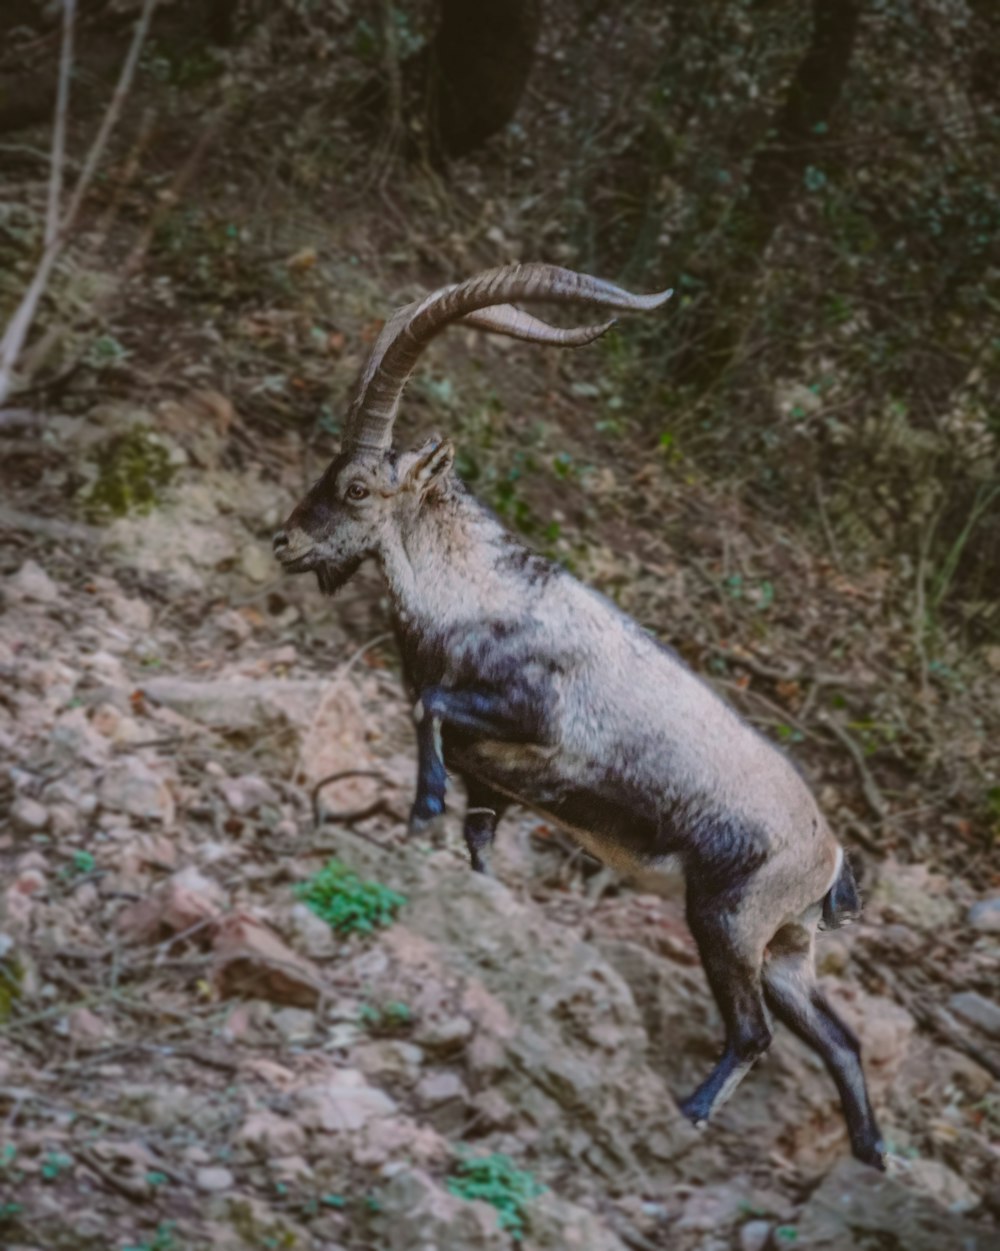 a goat jumping up into the air on a rocky hillside